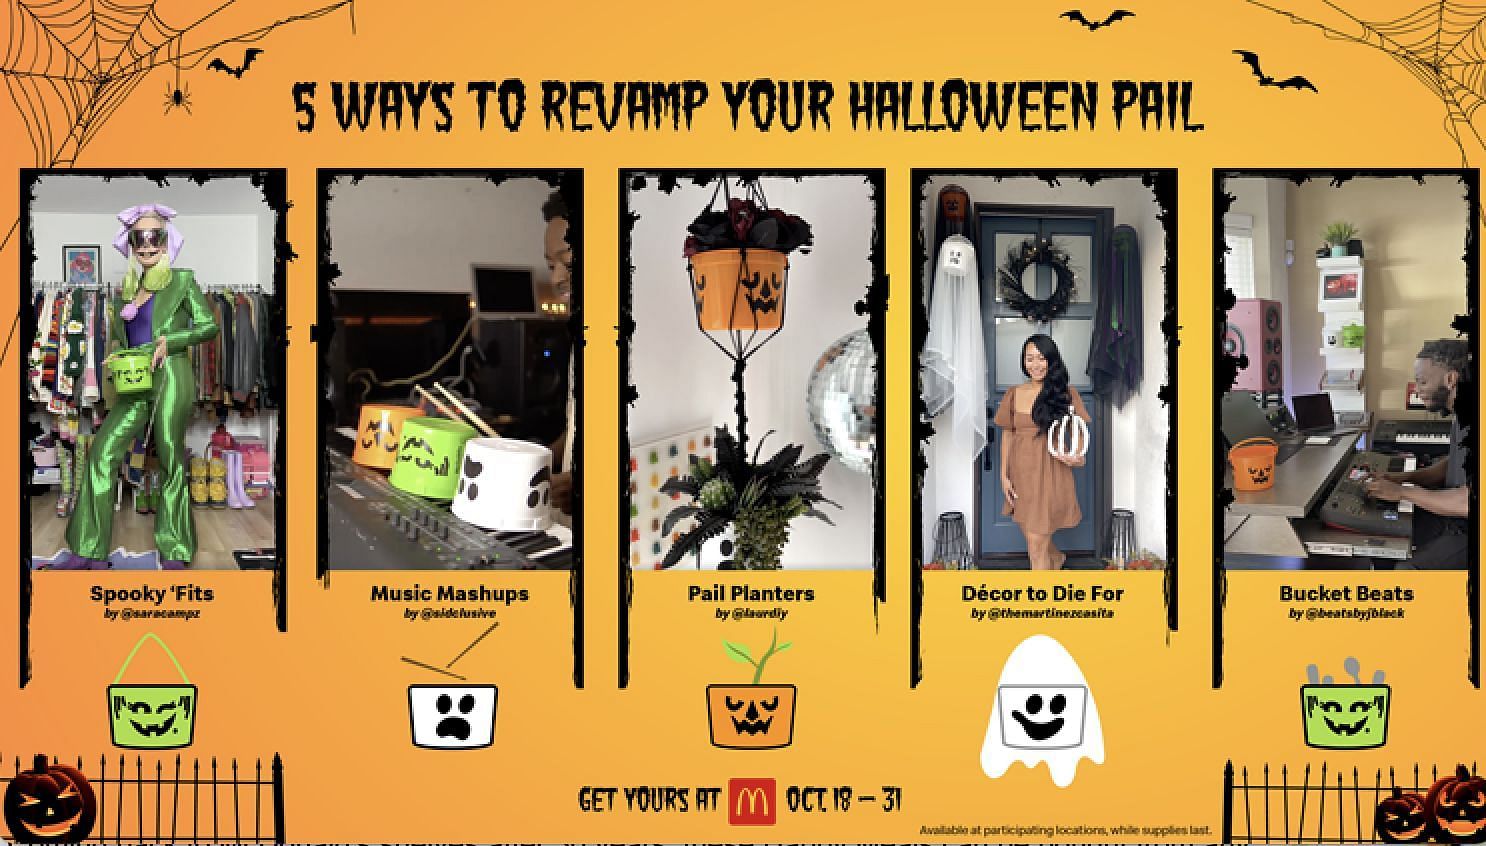 McDonald's Halloween Happy Meals How to get the Boo Buckets revealed